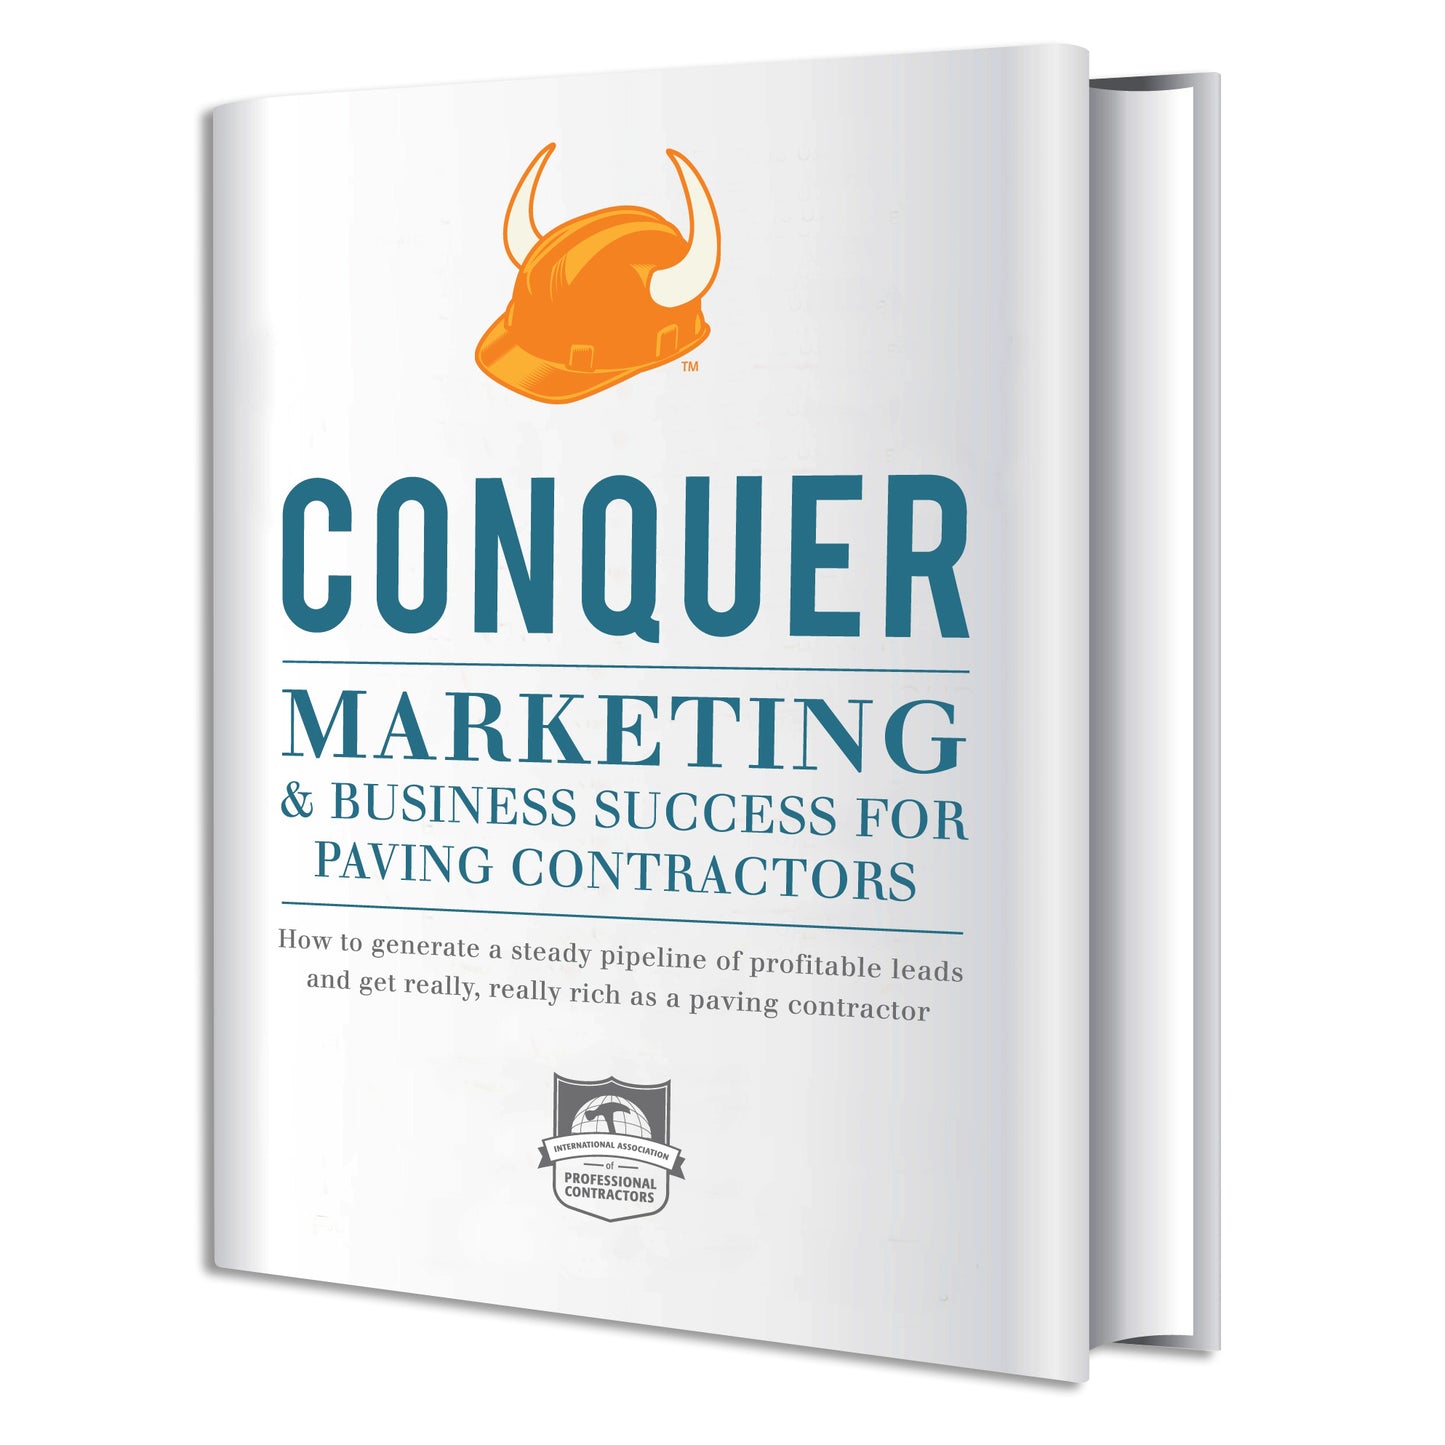 CONQUER Marketing and Business Success for Paving Contractors PDF